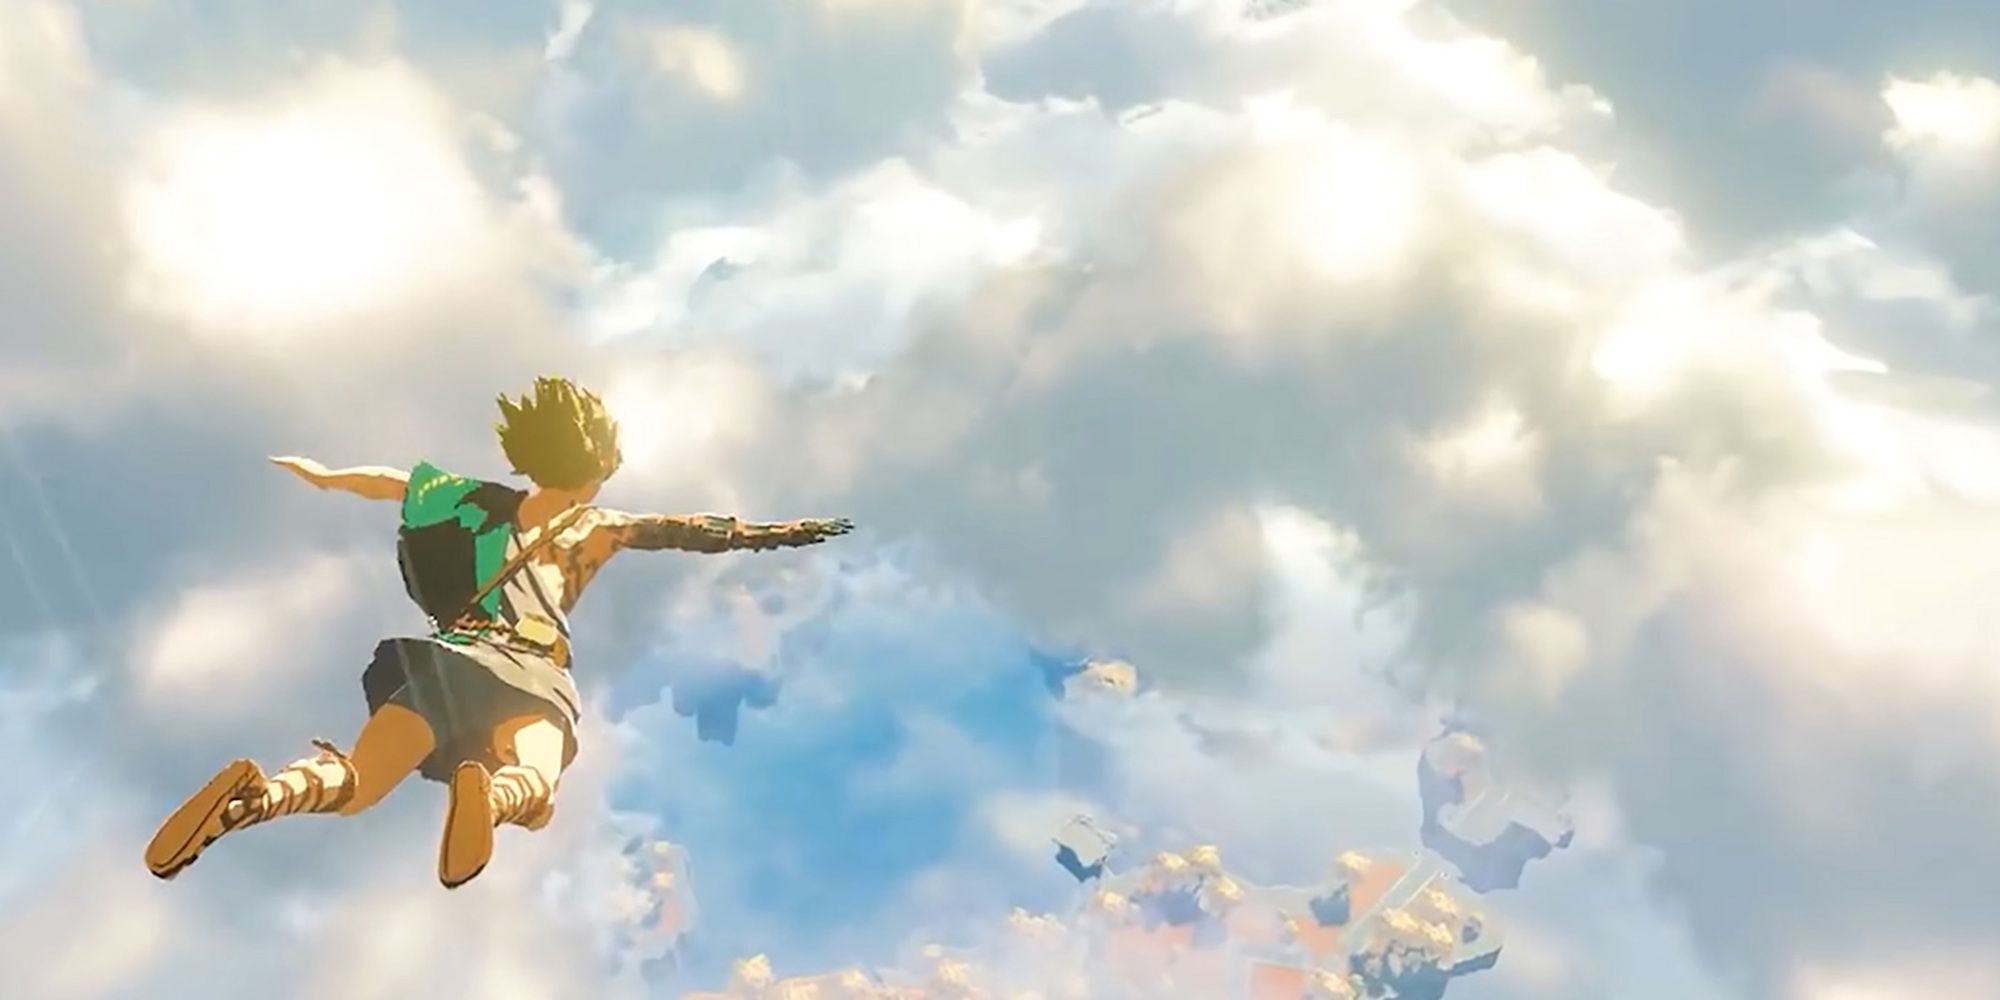 Legend-Of-Zelda-Breath-Of-The-Wild-2-Second-Trailer---The-New-Sky-Islands-Seen-From-Above-1